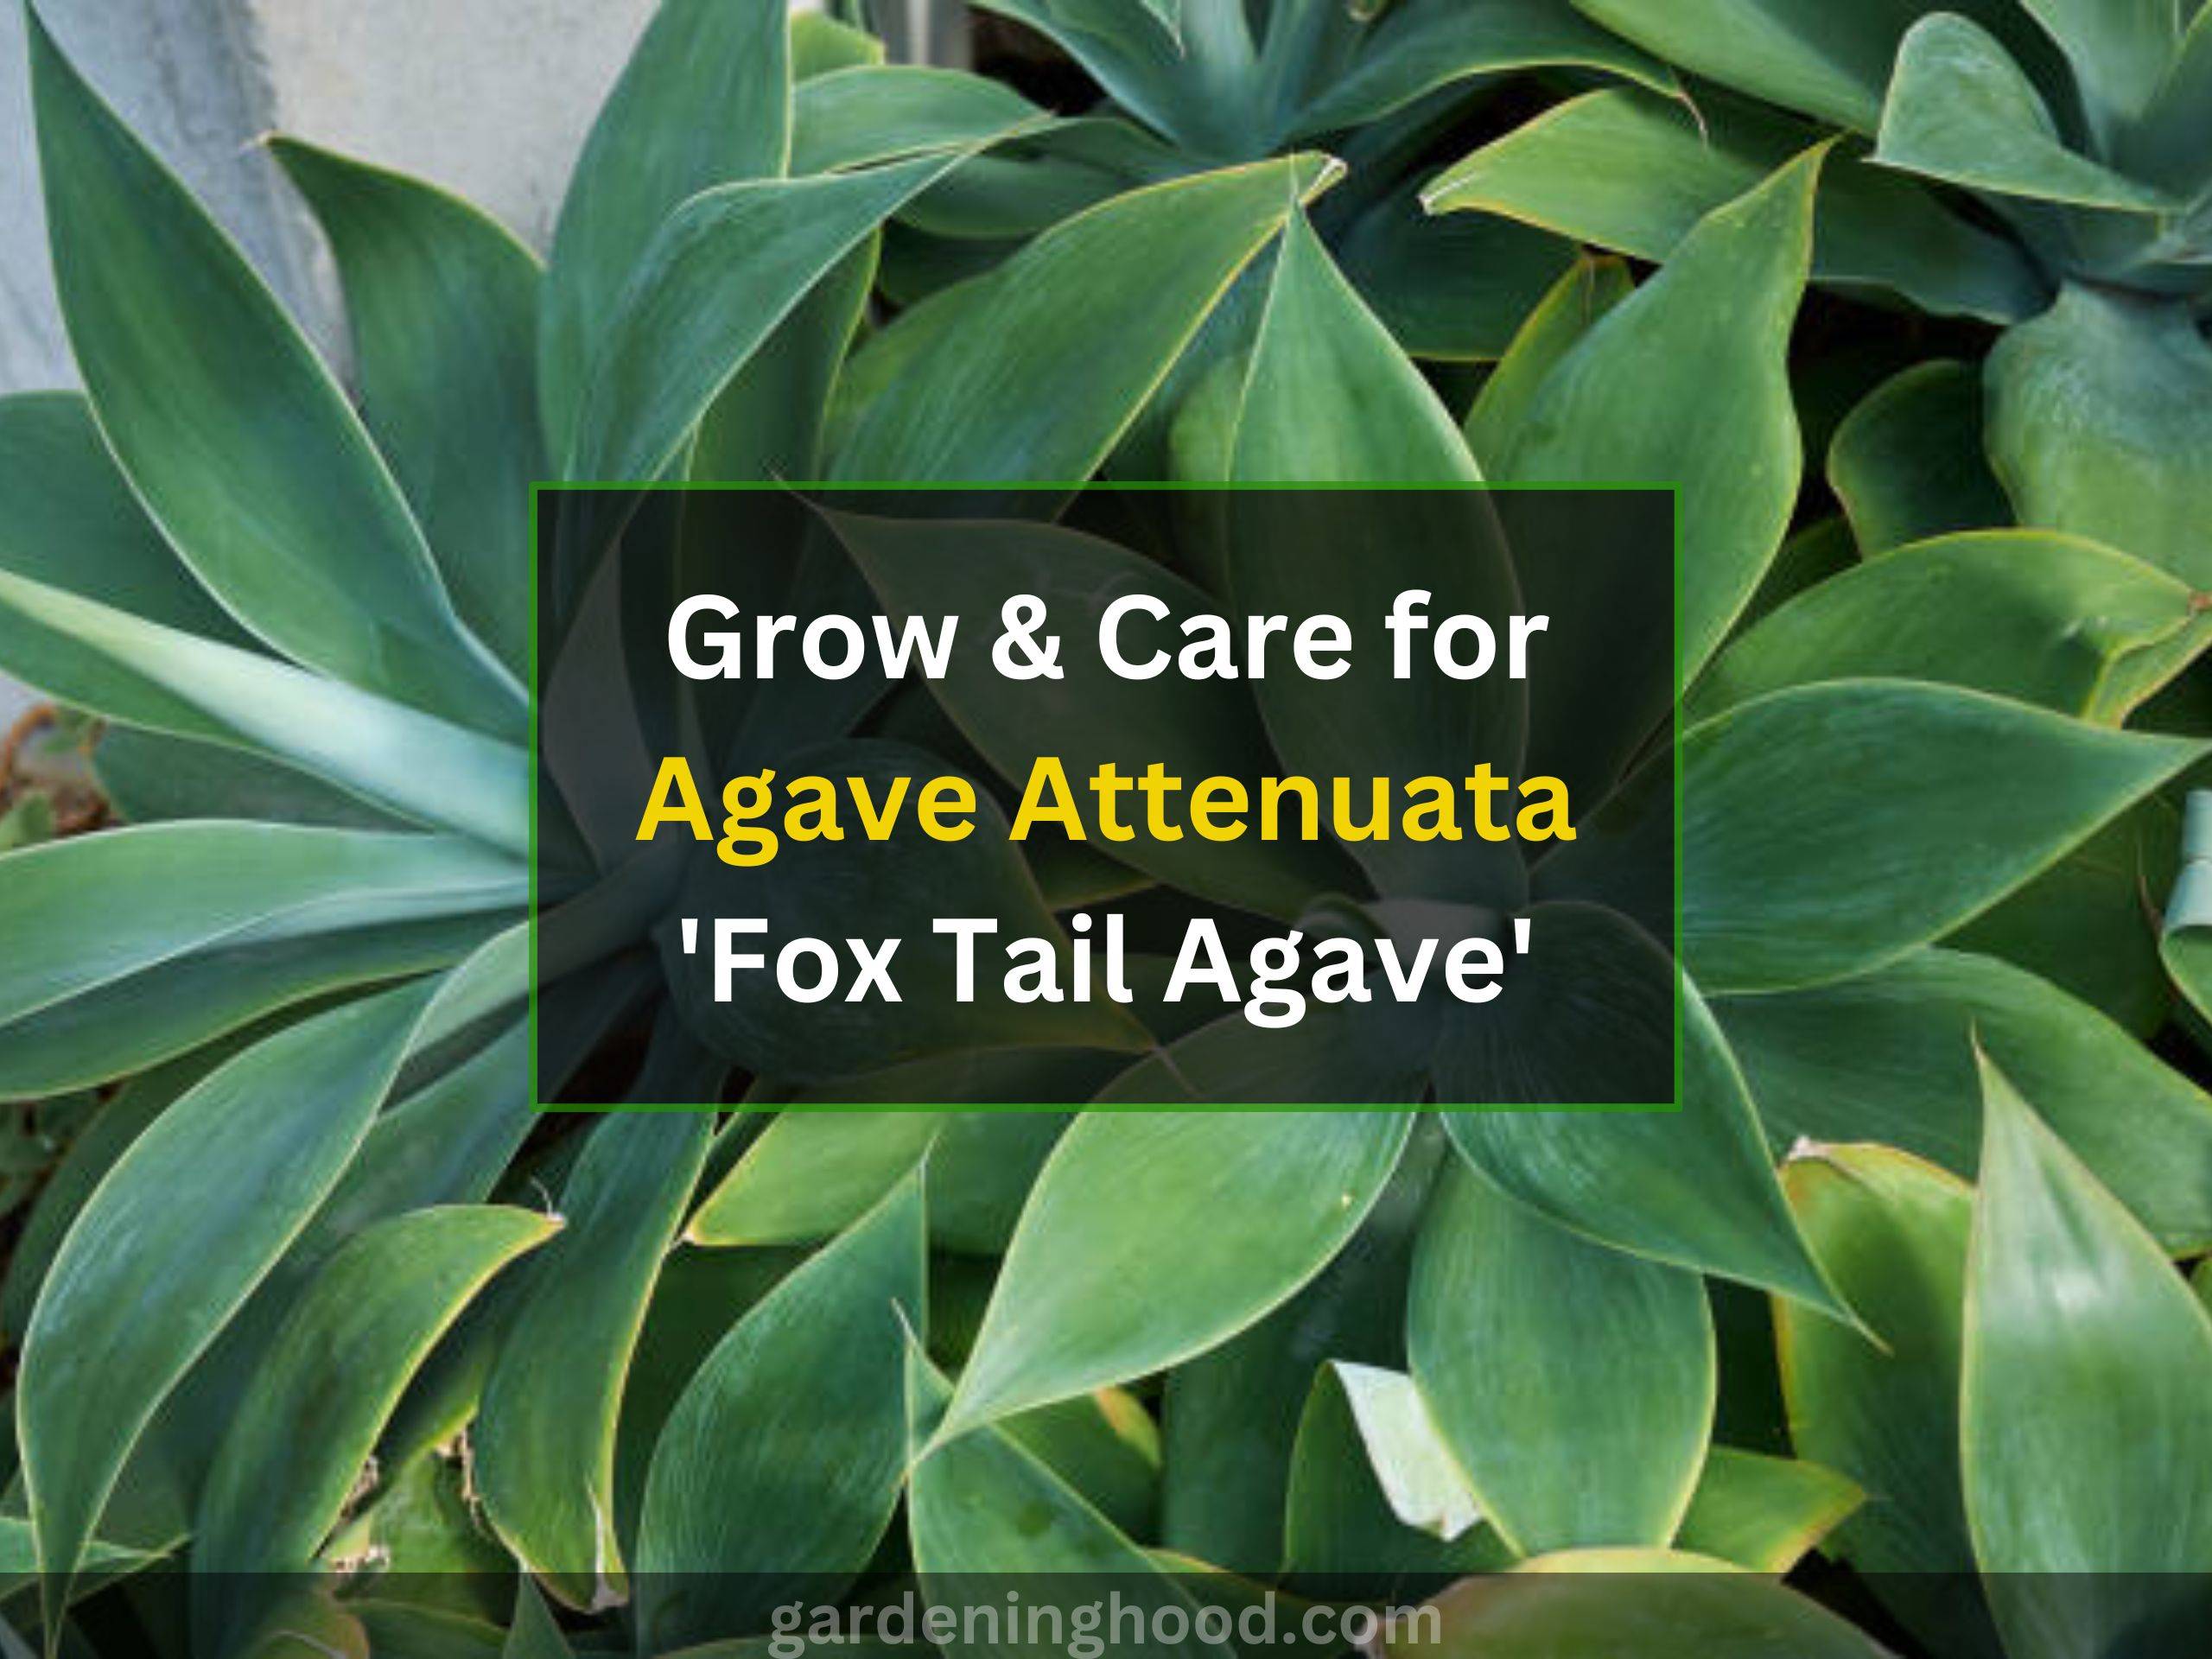 Grow & Care for Agave Attenuata 'Fox Tail Agave'